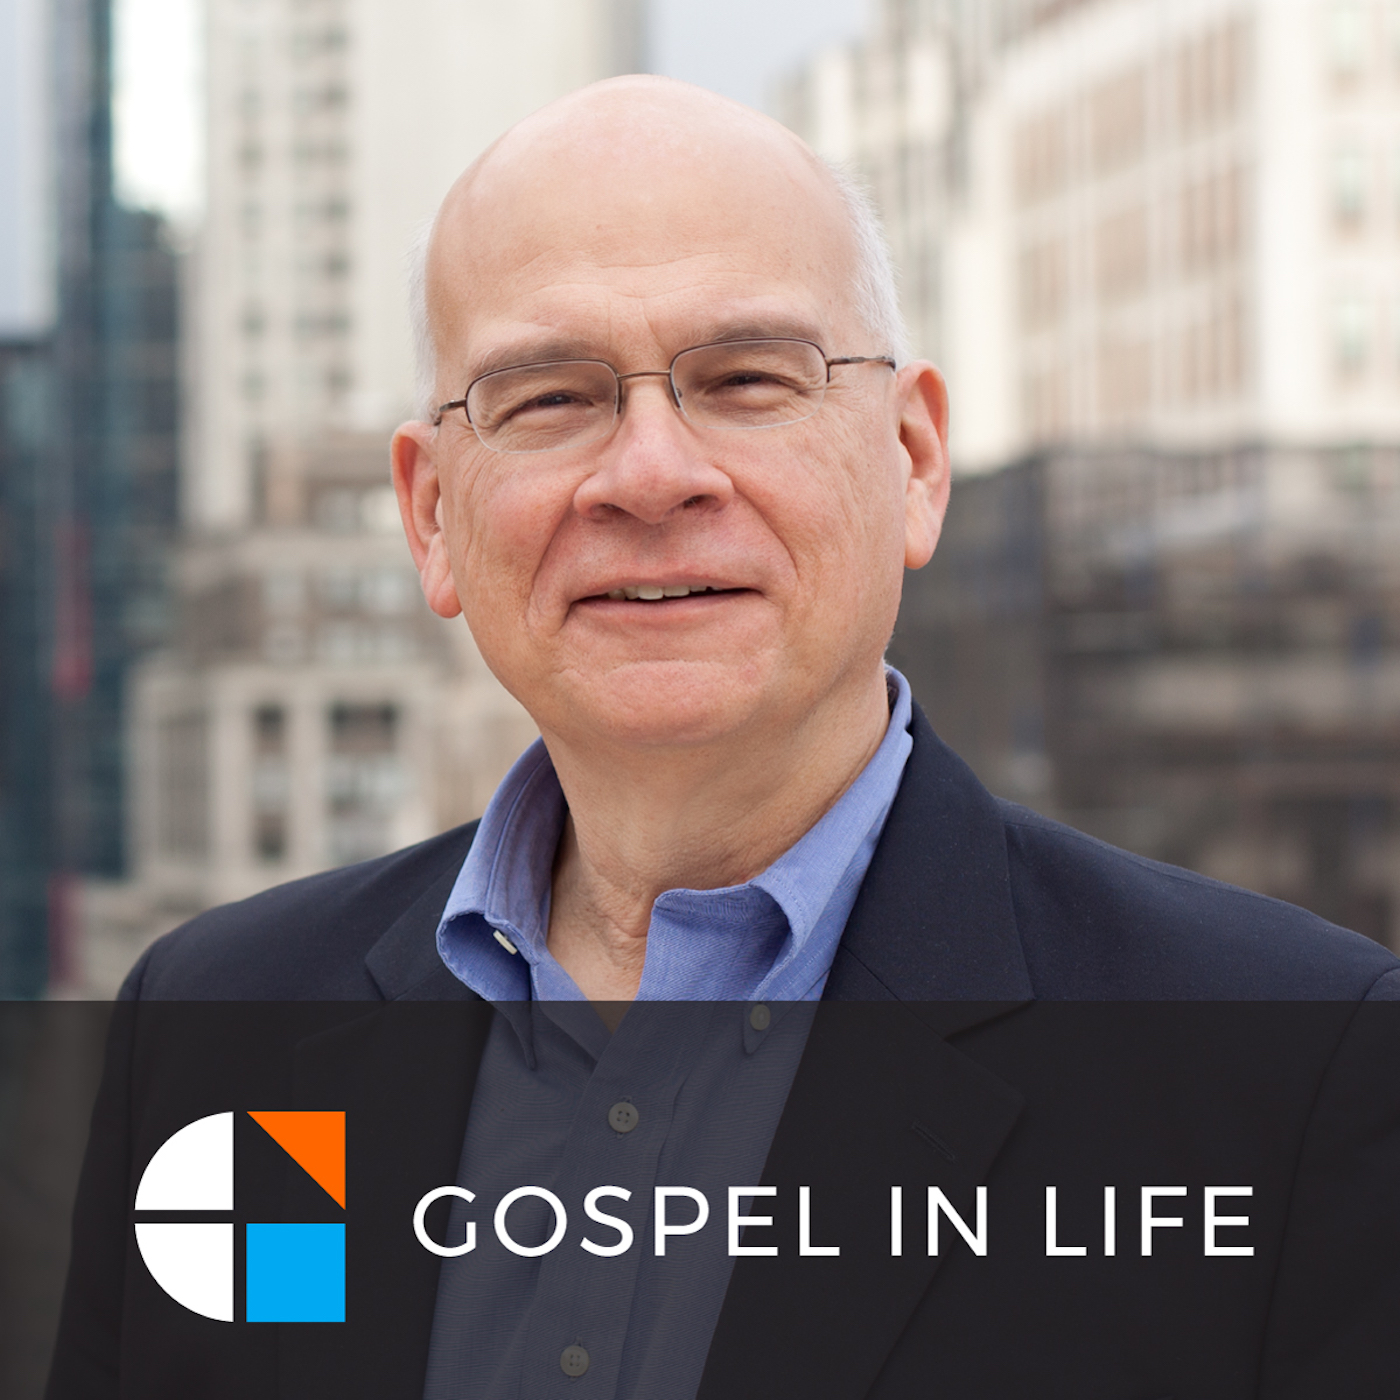 Fresh update on "jesus christ" discussed on Timothy Keller Sermons Podcast by Gospel in Life